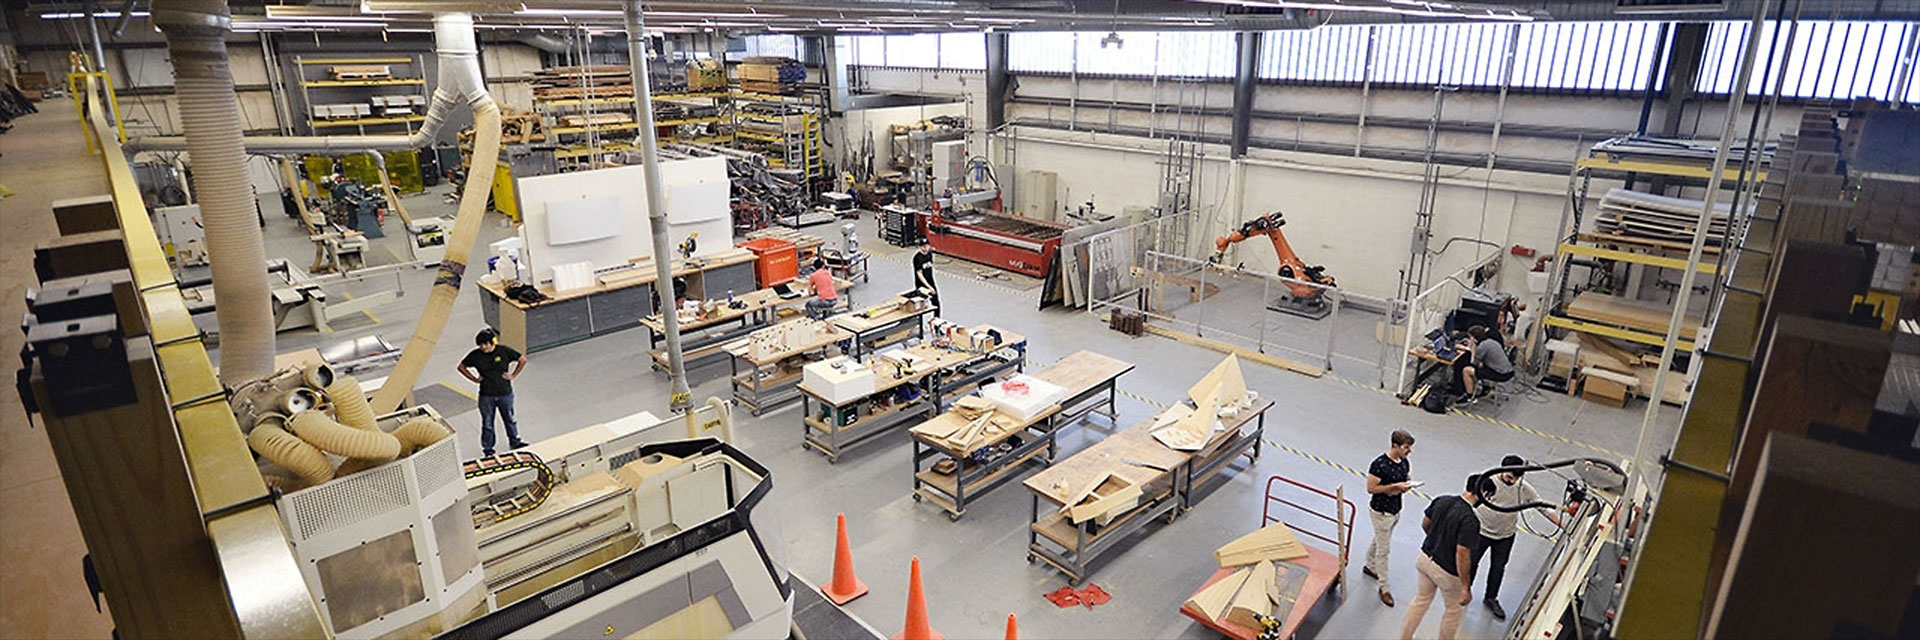 A top-down view of several students working in the Digital Fabrication Lab, showing several work tables, CNC machines, and a Kuka robot.